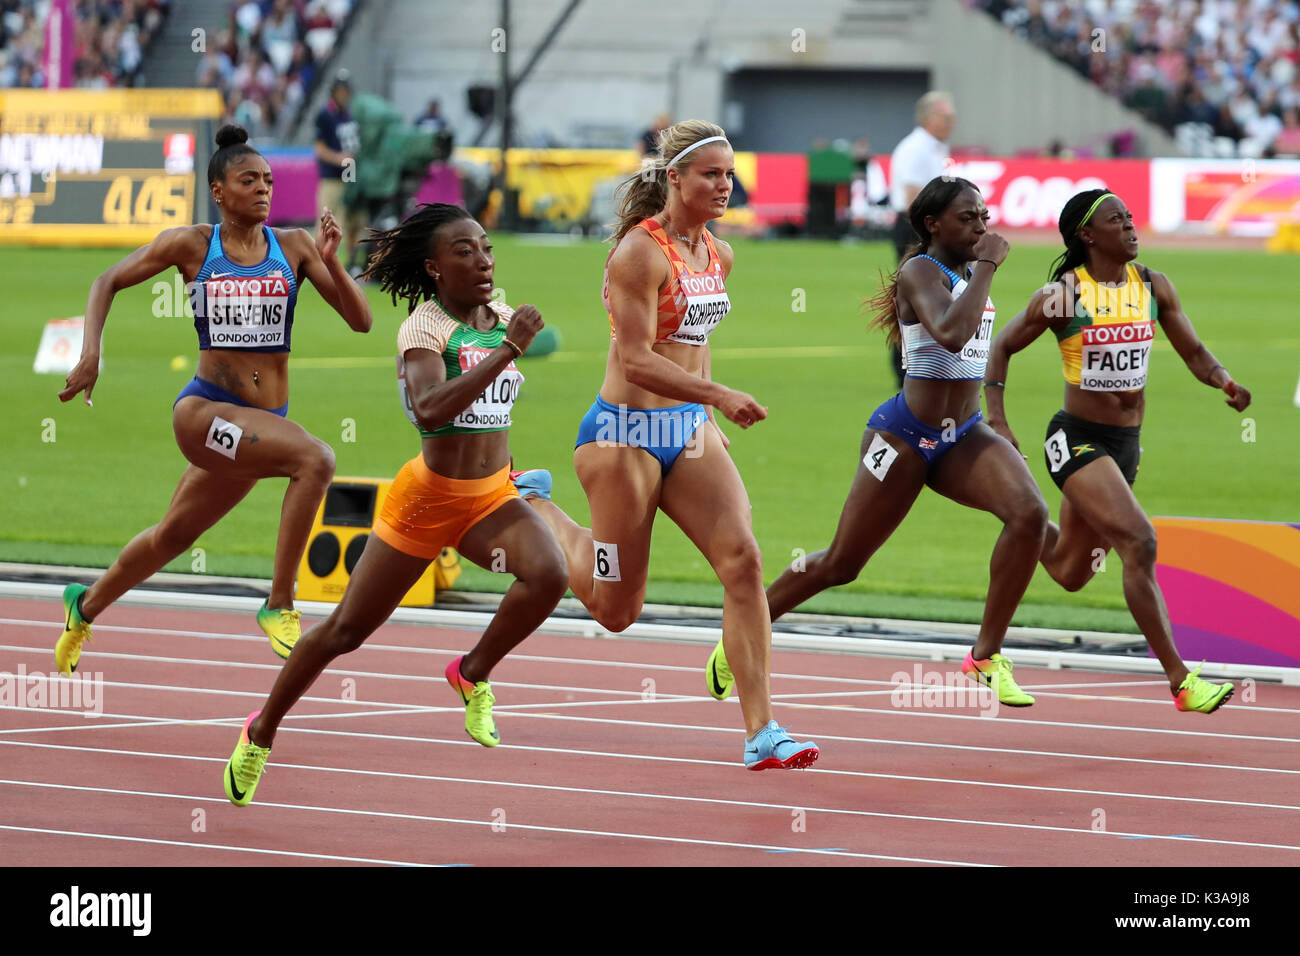 Simone FACEY (Jamaica), Daryll NEITA (Great Britain), Deajah STEVENS (United States of America), Dafne SCHIPPERS (Netherlands, Holland), Marie-Josée TA LOU (Côte d'Ivoire, Ivory Coast) competing in the Women's 100m Semi-Final 1 at the 2017, IAAF World Championships, Queen Elizabeth Olympic Park, Stratford, London, UK. Stock Photo